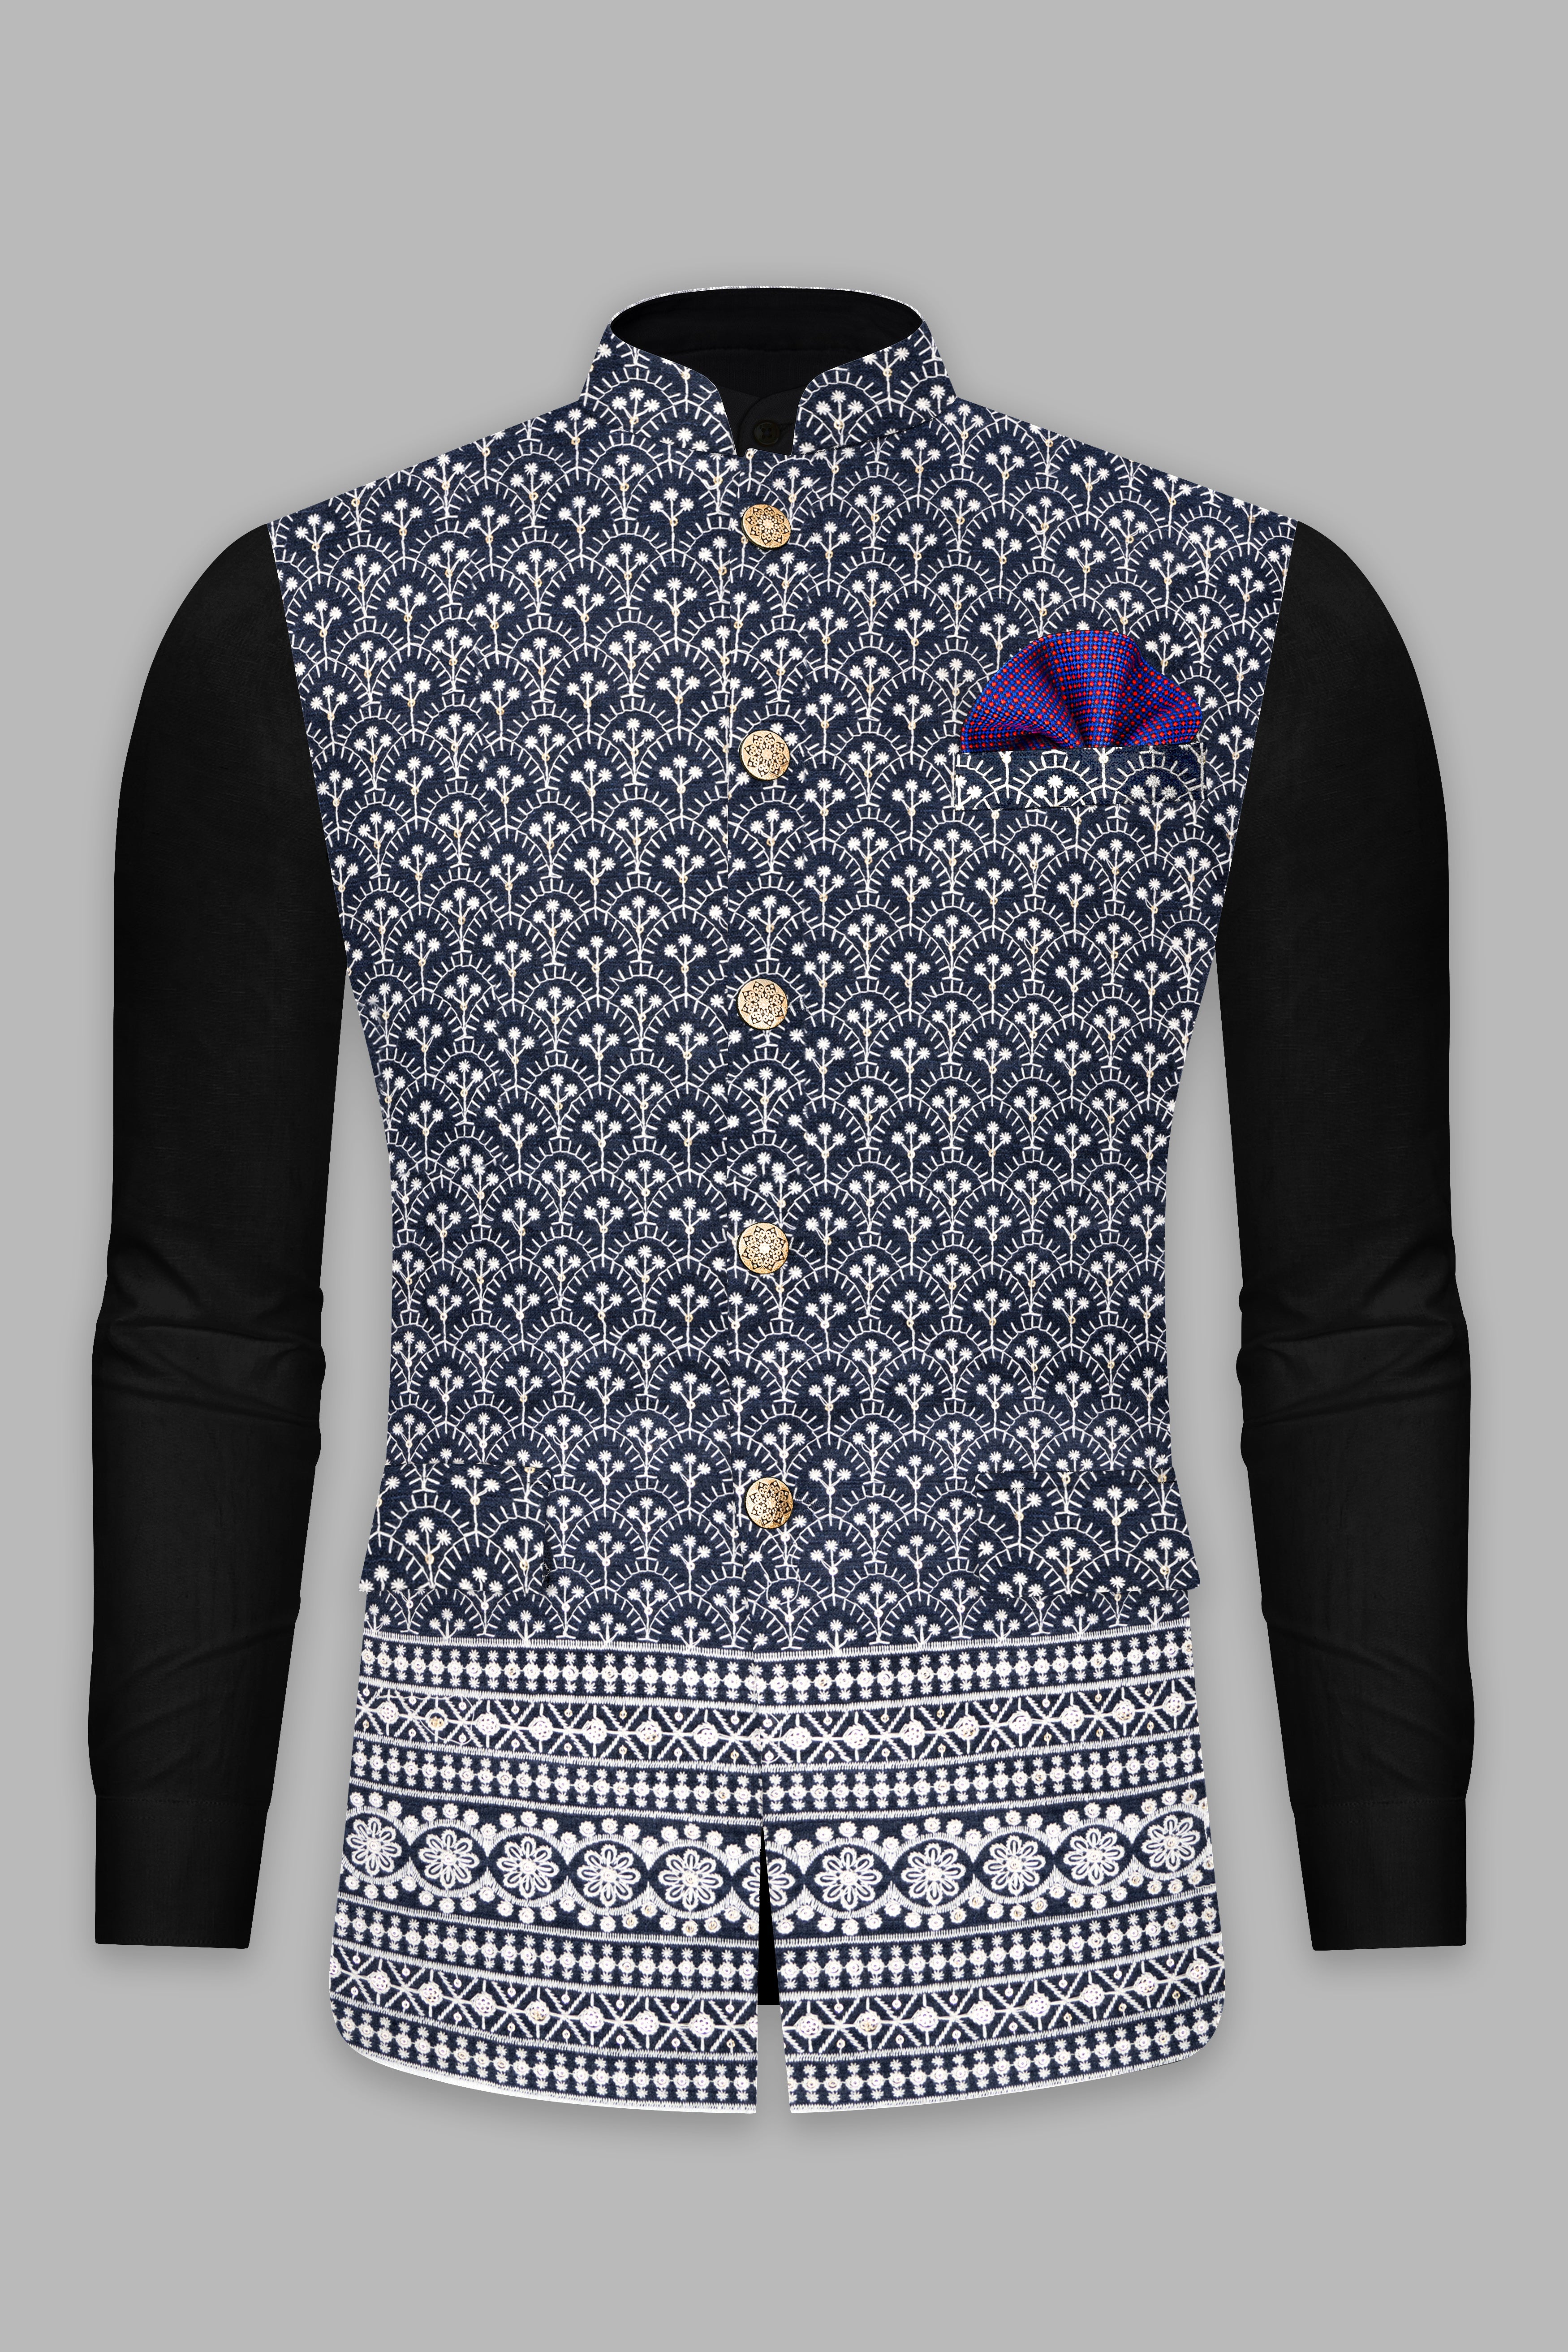 Cloud Blue and White Thread Embroidered Nehru Jacket WC3508-36,  WC3508-38,  WC3508-40,  WC3508-42,  WC3508-44,  WC3508-46,  WC3508-48,  WC3508-50,  WC3508-52,  WC3508-54,  WC3508-56,  WC3508-58,  WC3508-60